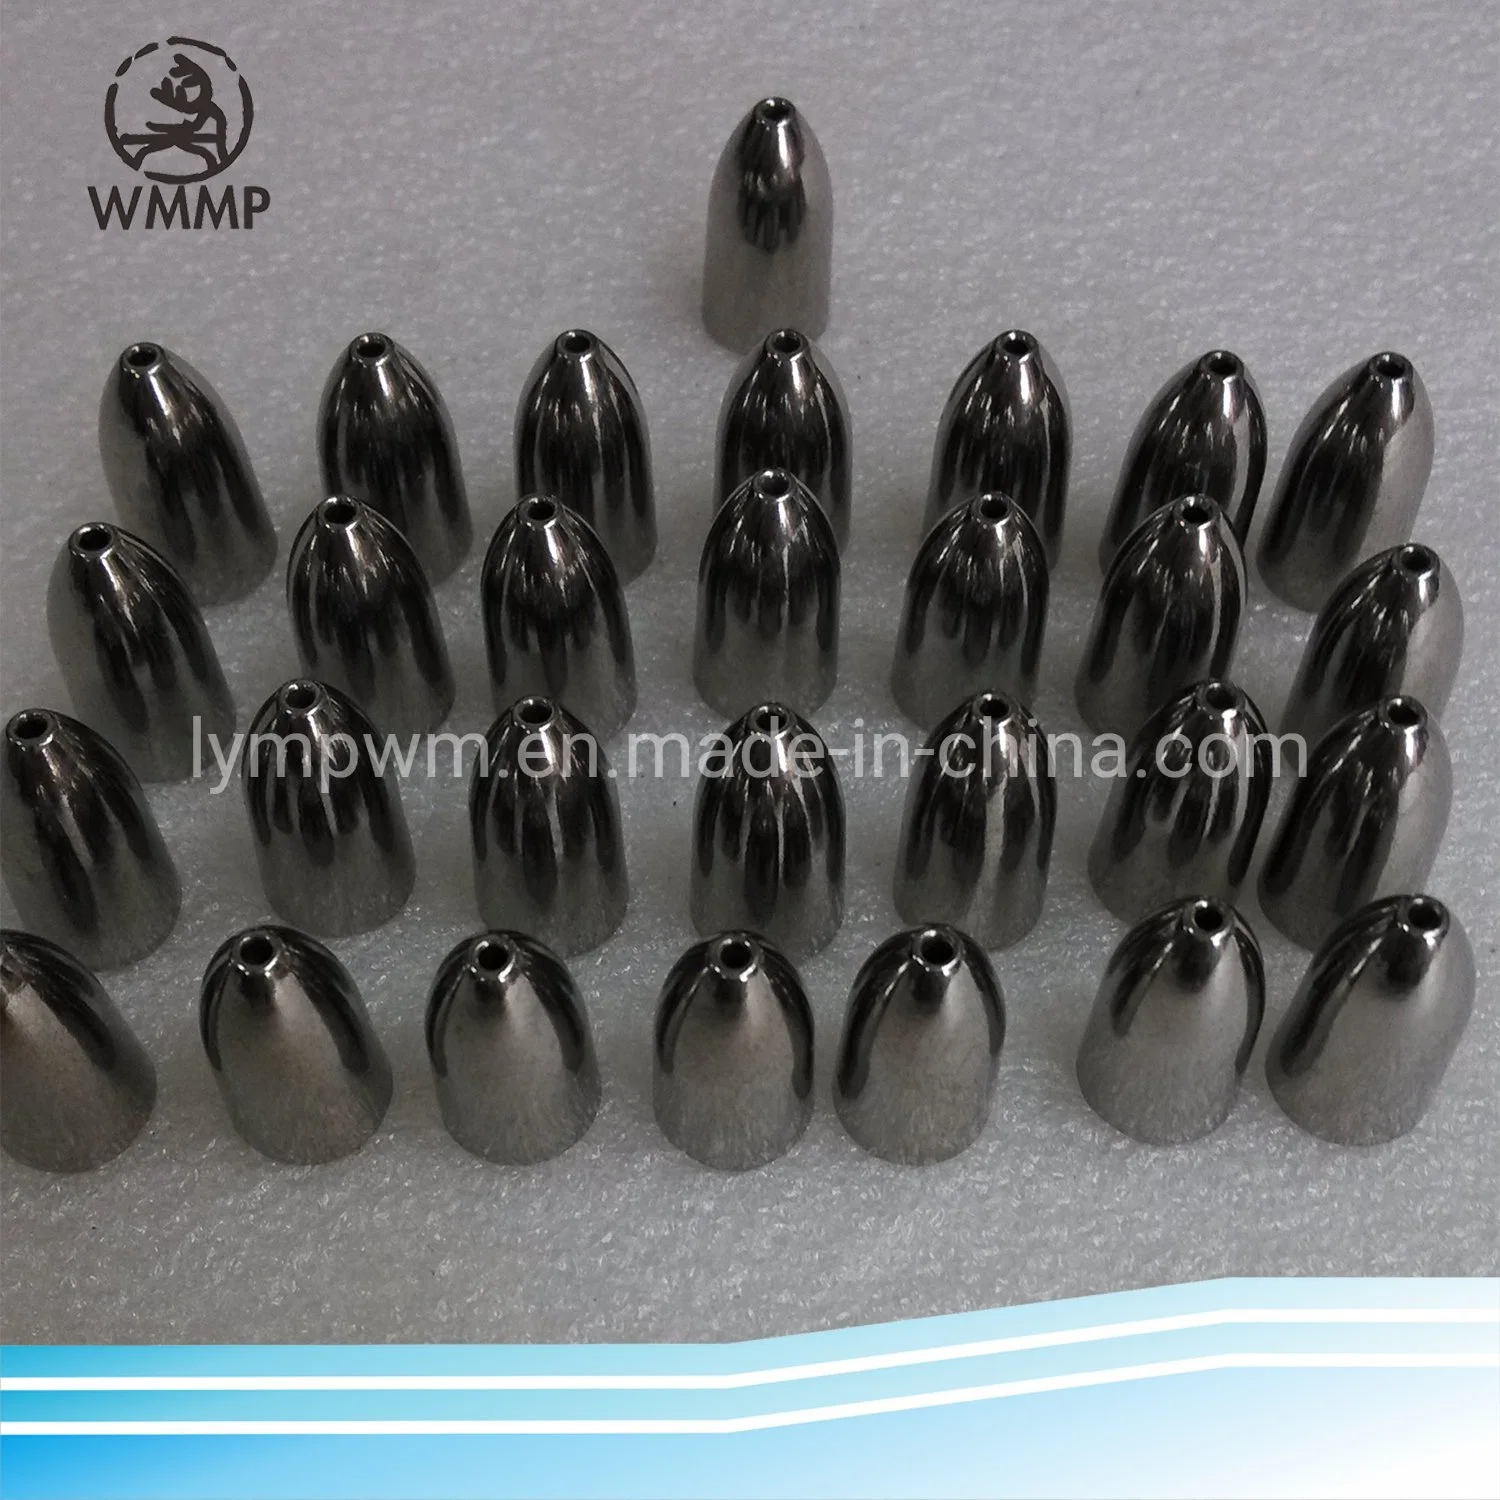 Plain Color Polished Tungsten Flipping Weight&Tungsten Fishing Weight Producer